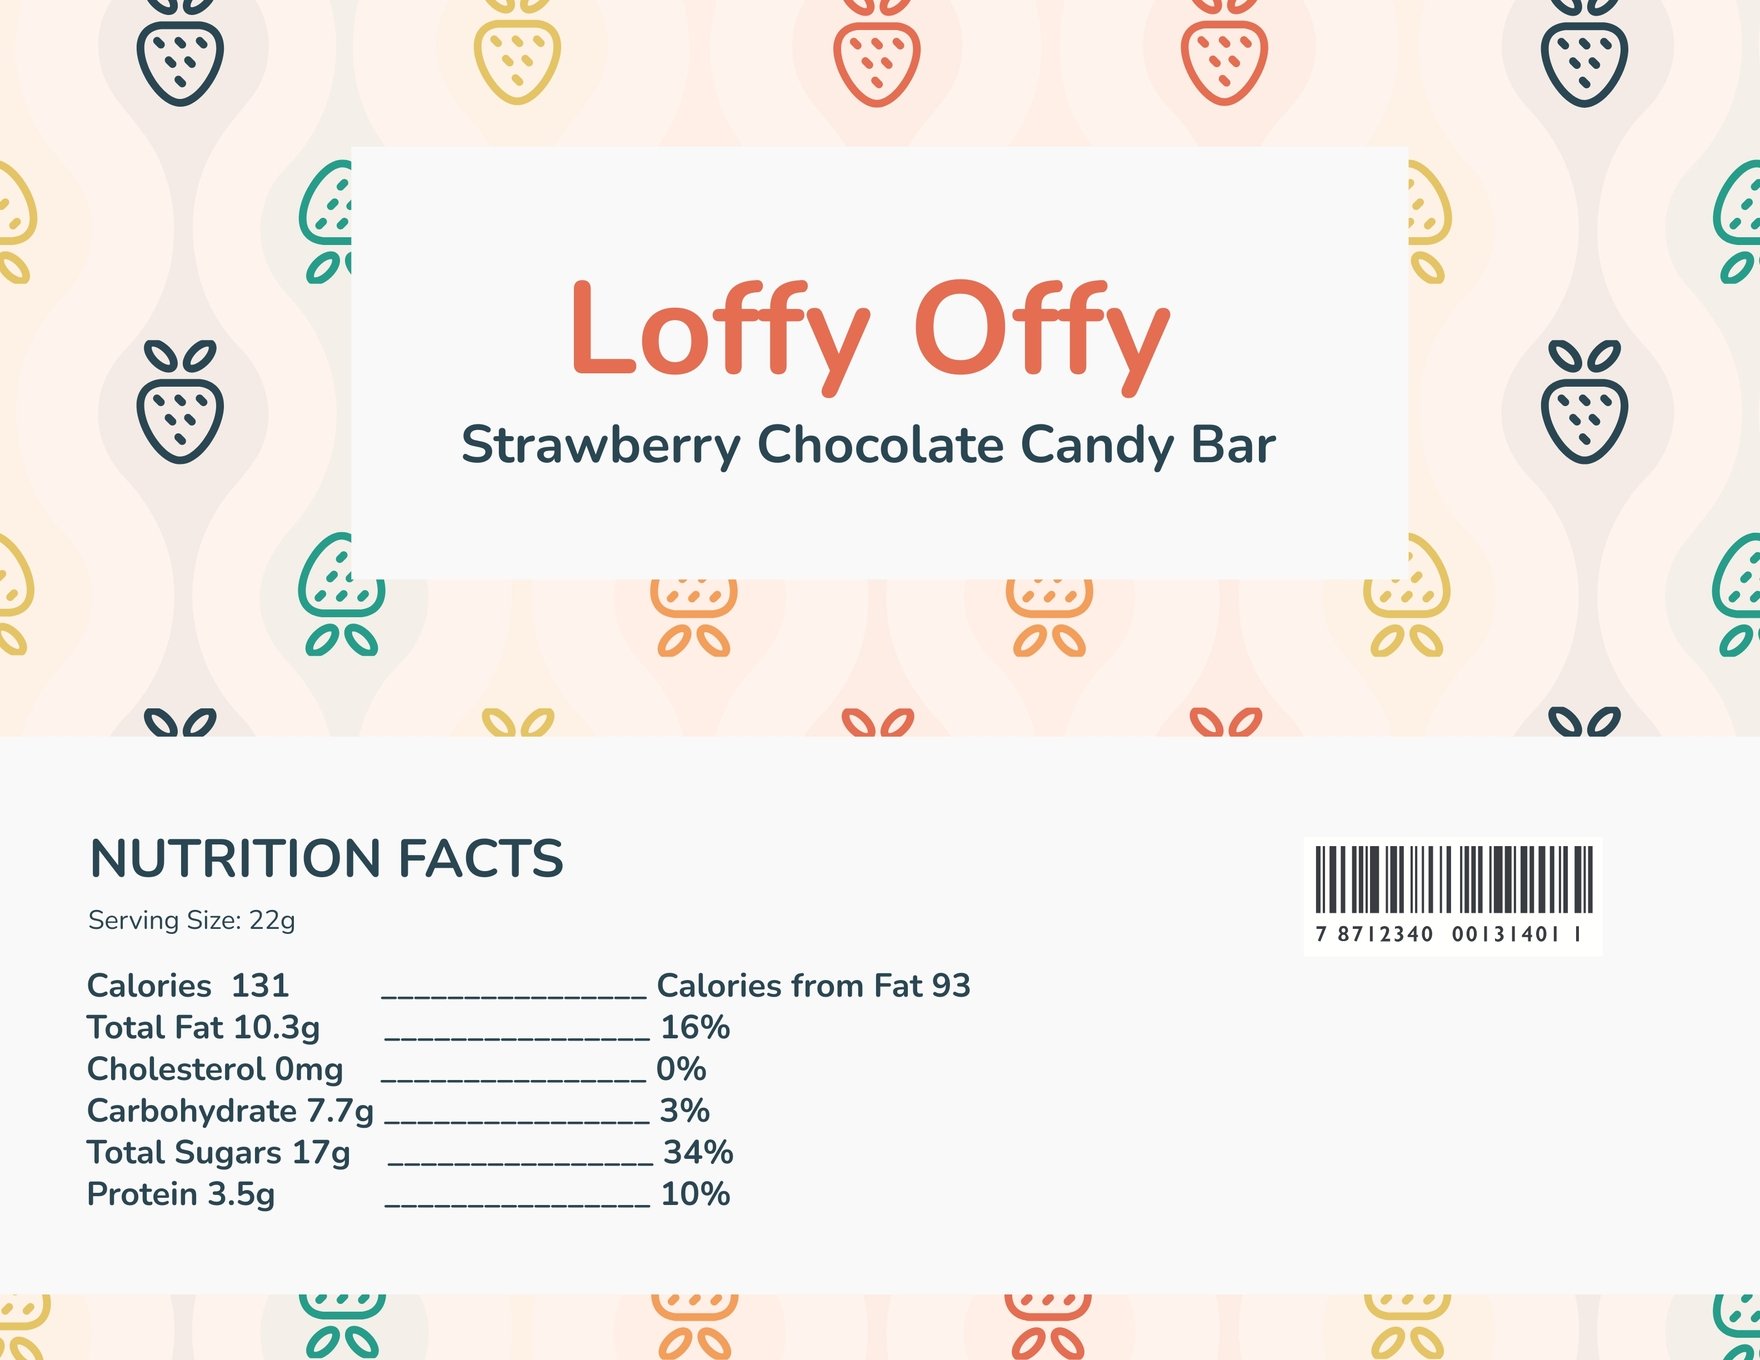 Candy Bar Wrapper Template